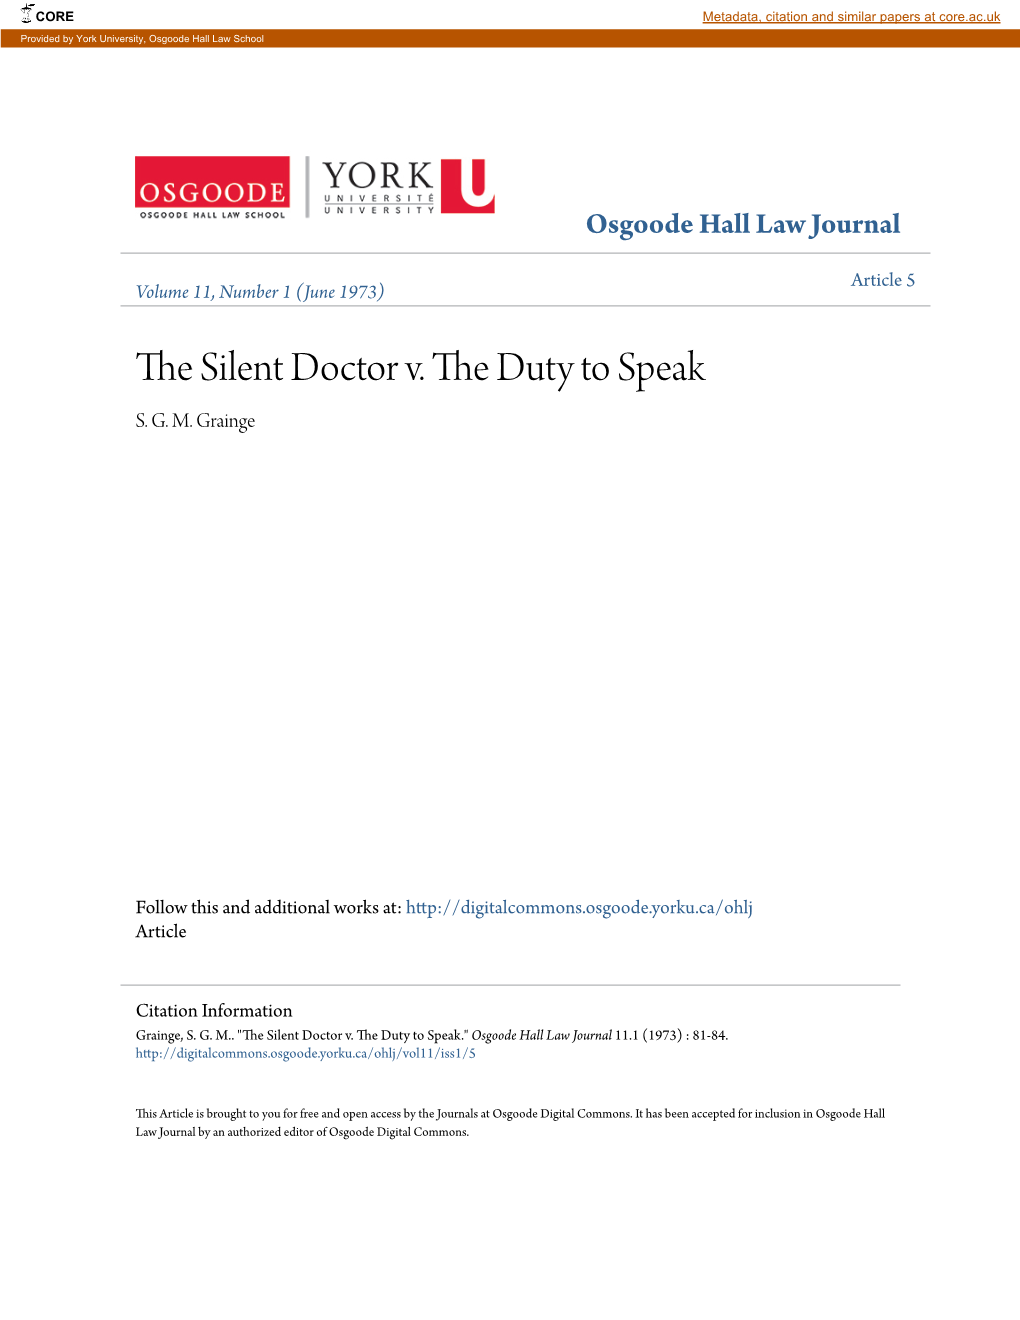 THE SILENT DOCTOR V. the DUTY to SPEAK a Simple-Minded Dissertation on the Law of Libel and Slander* by S